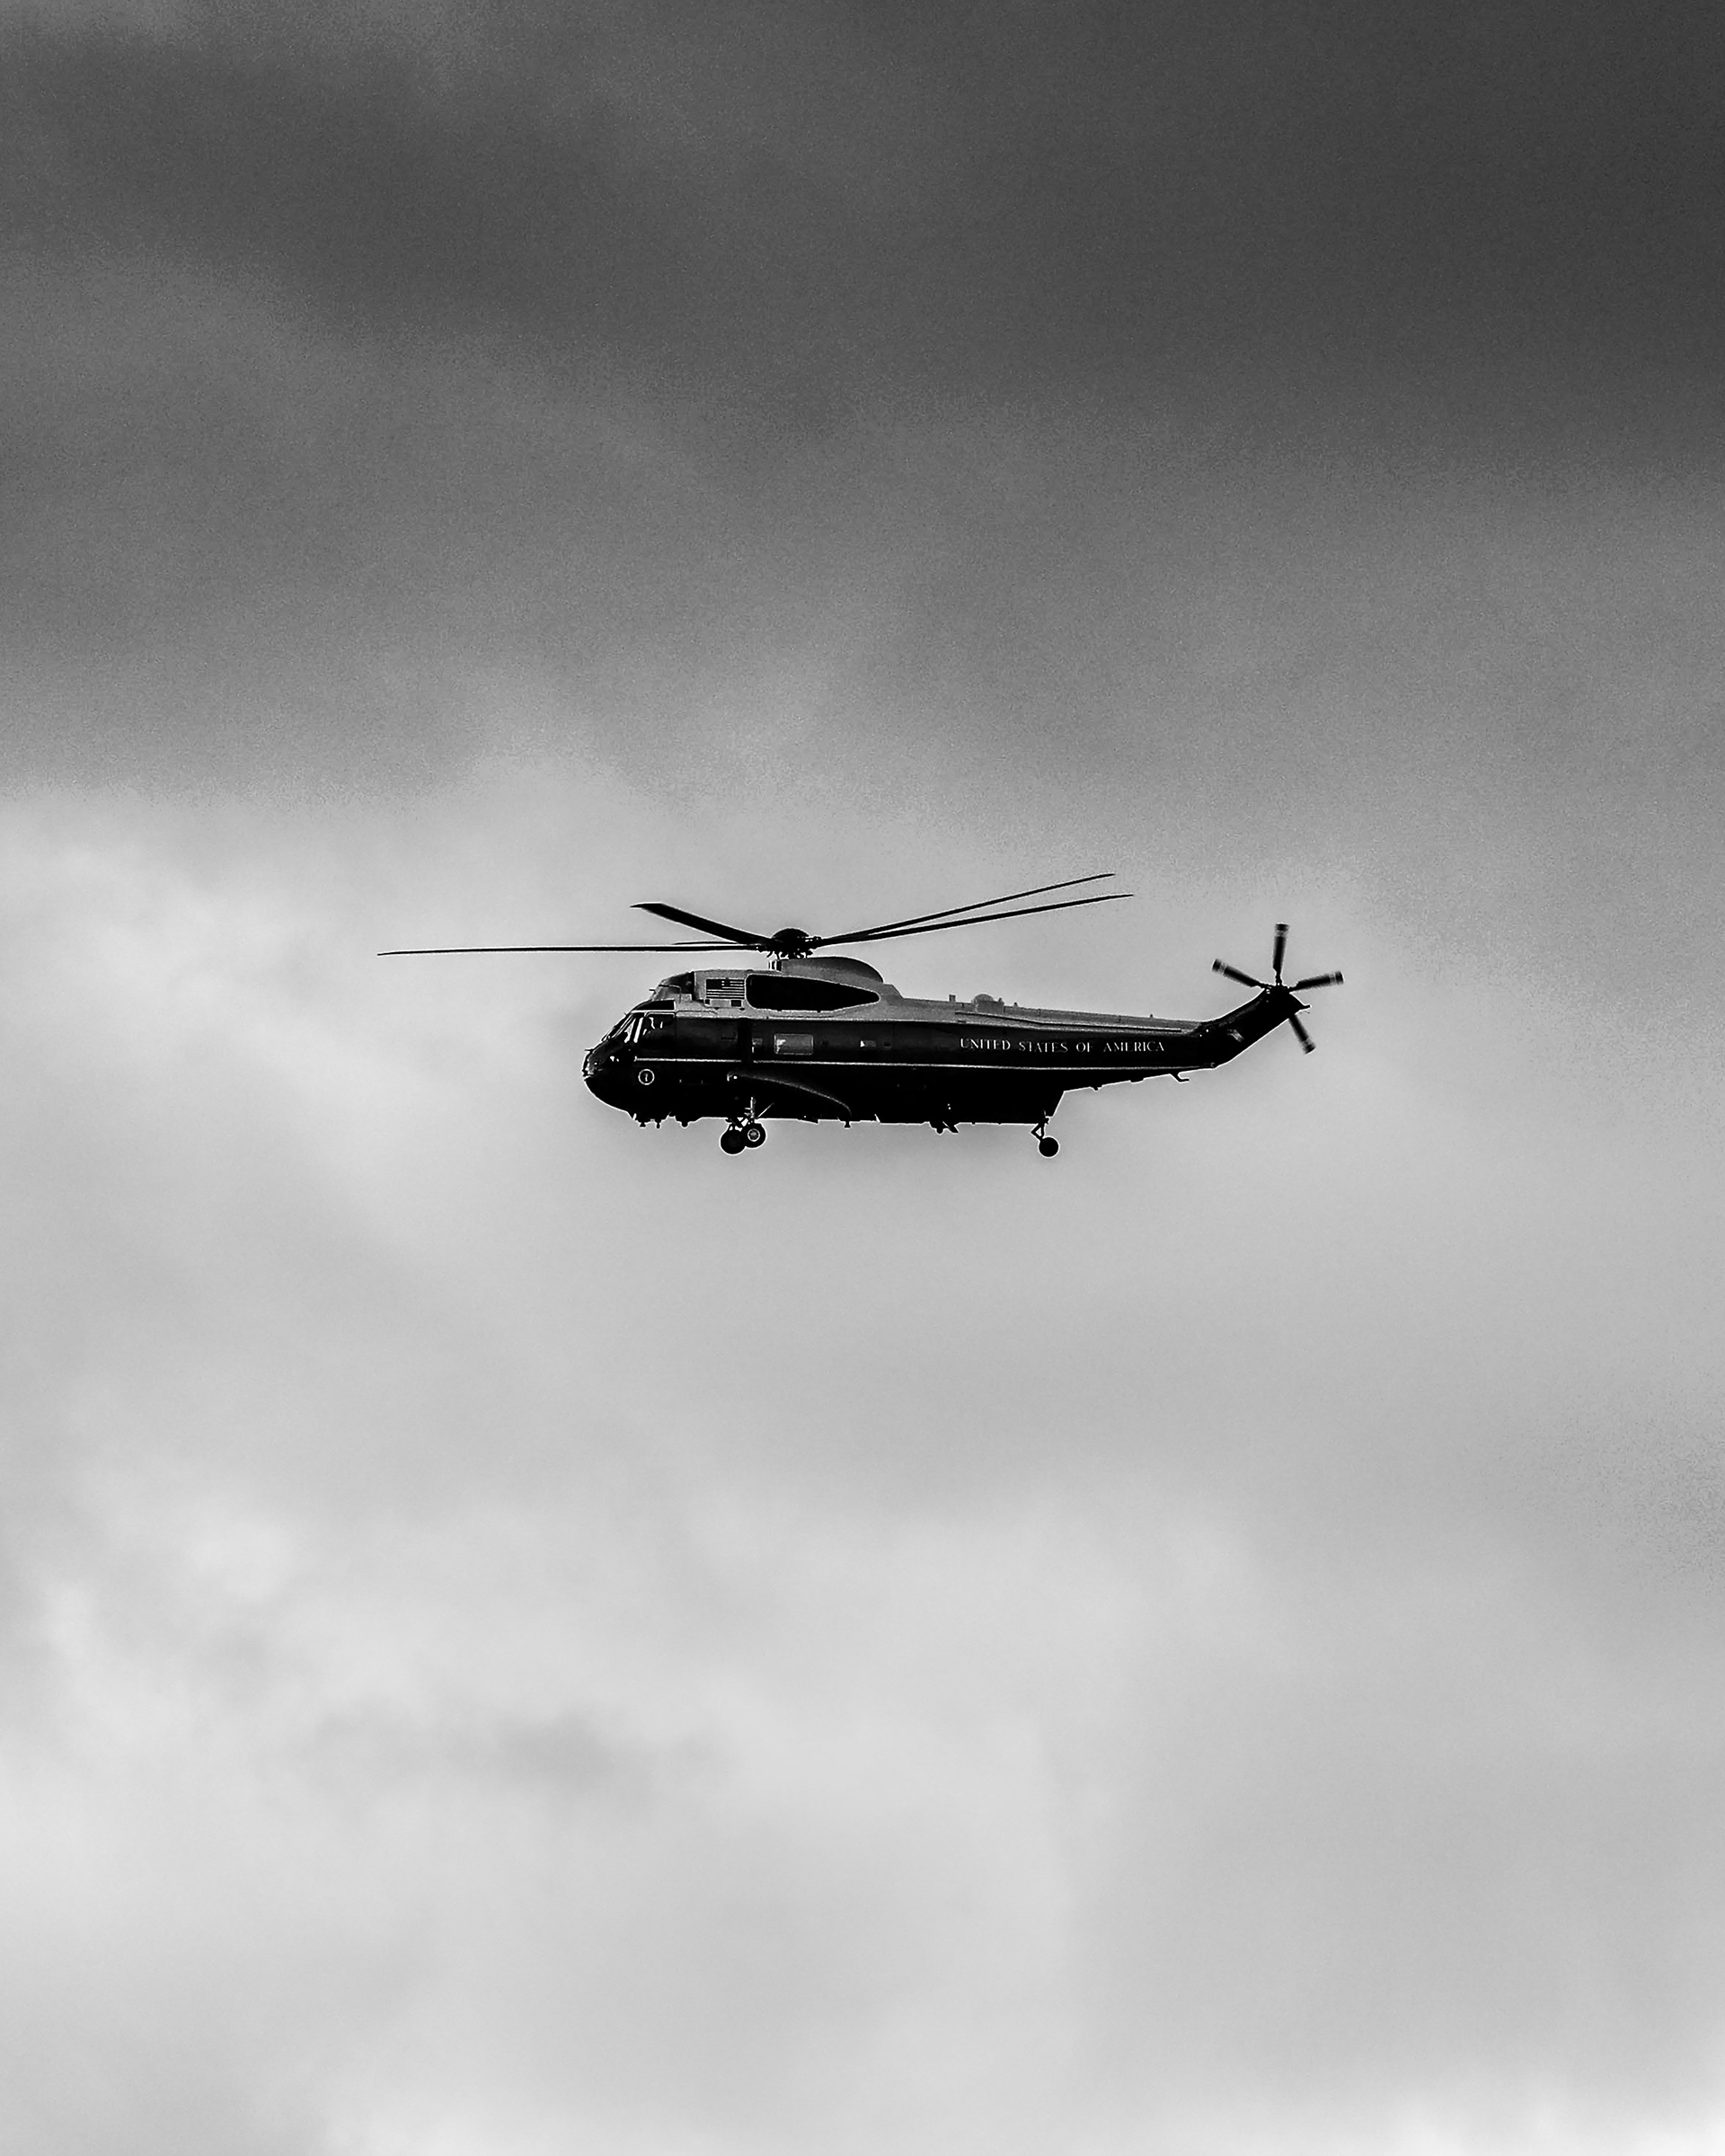 Marine One circles the National Mall carrying President Donald Trump as he departs the White House ahead of the inauguration. (Philip Montgomery for TIME)